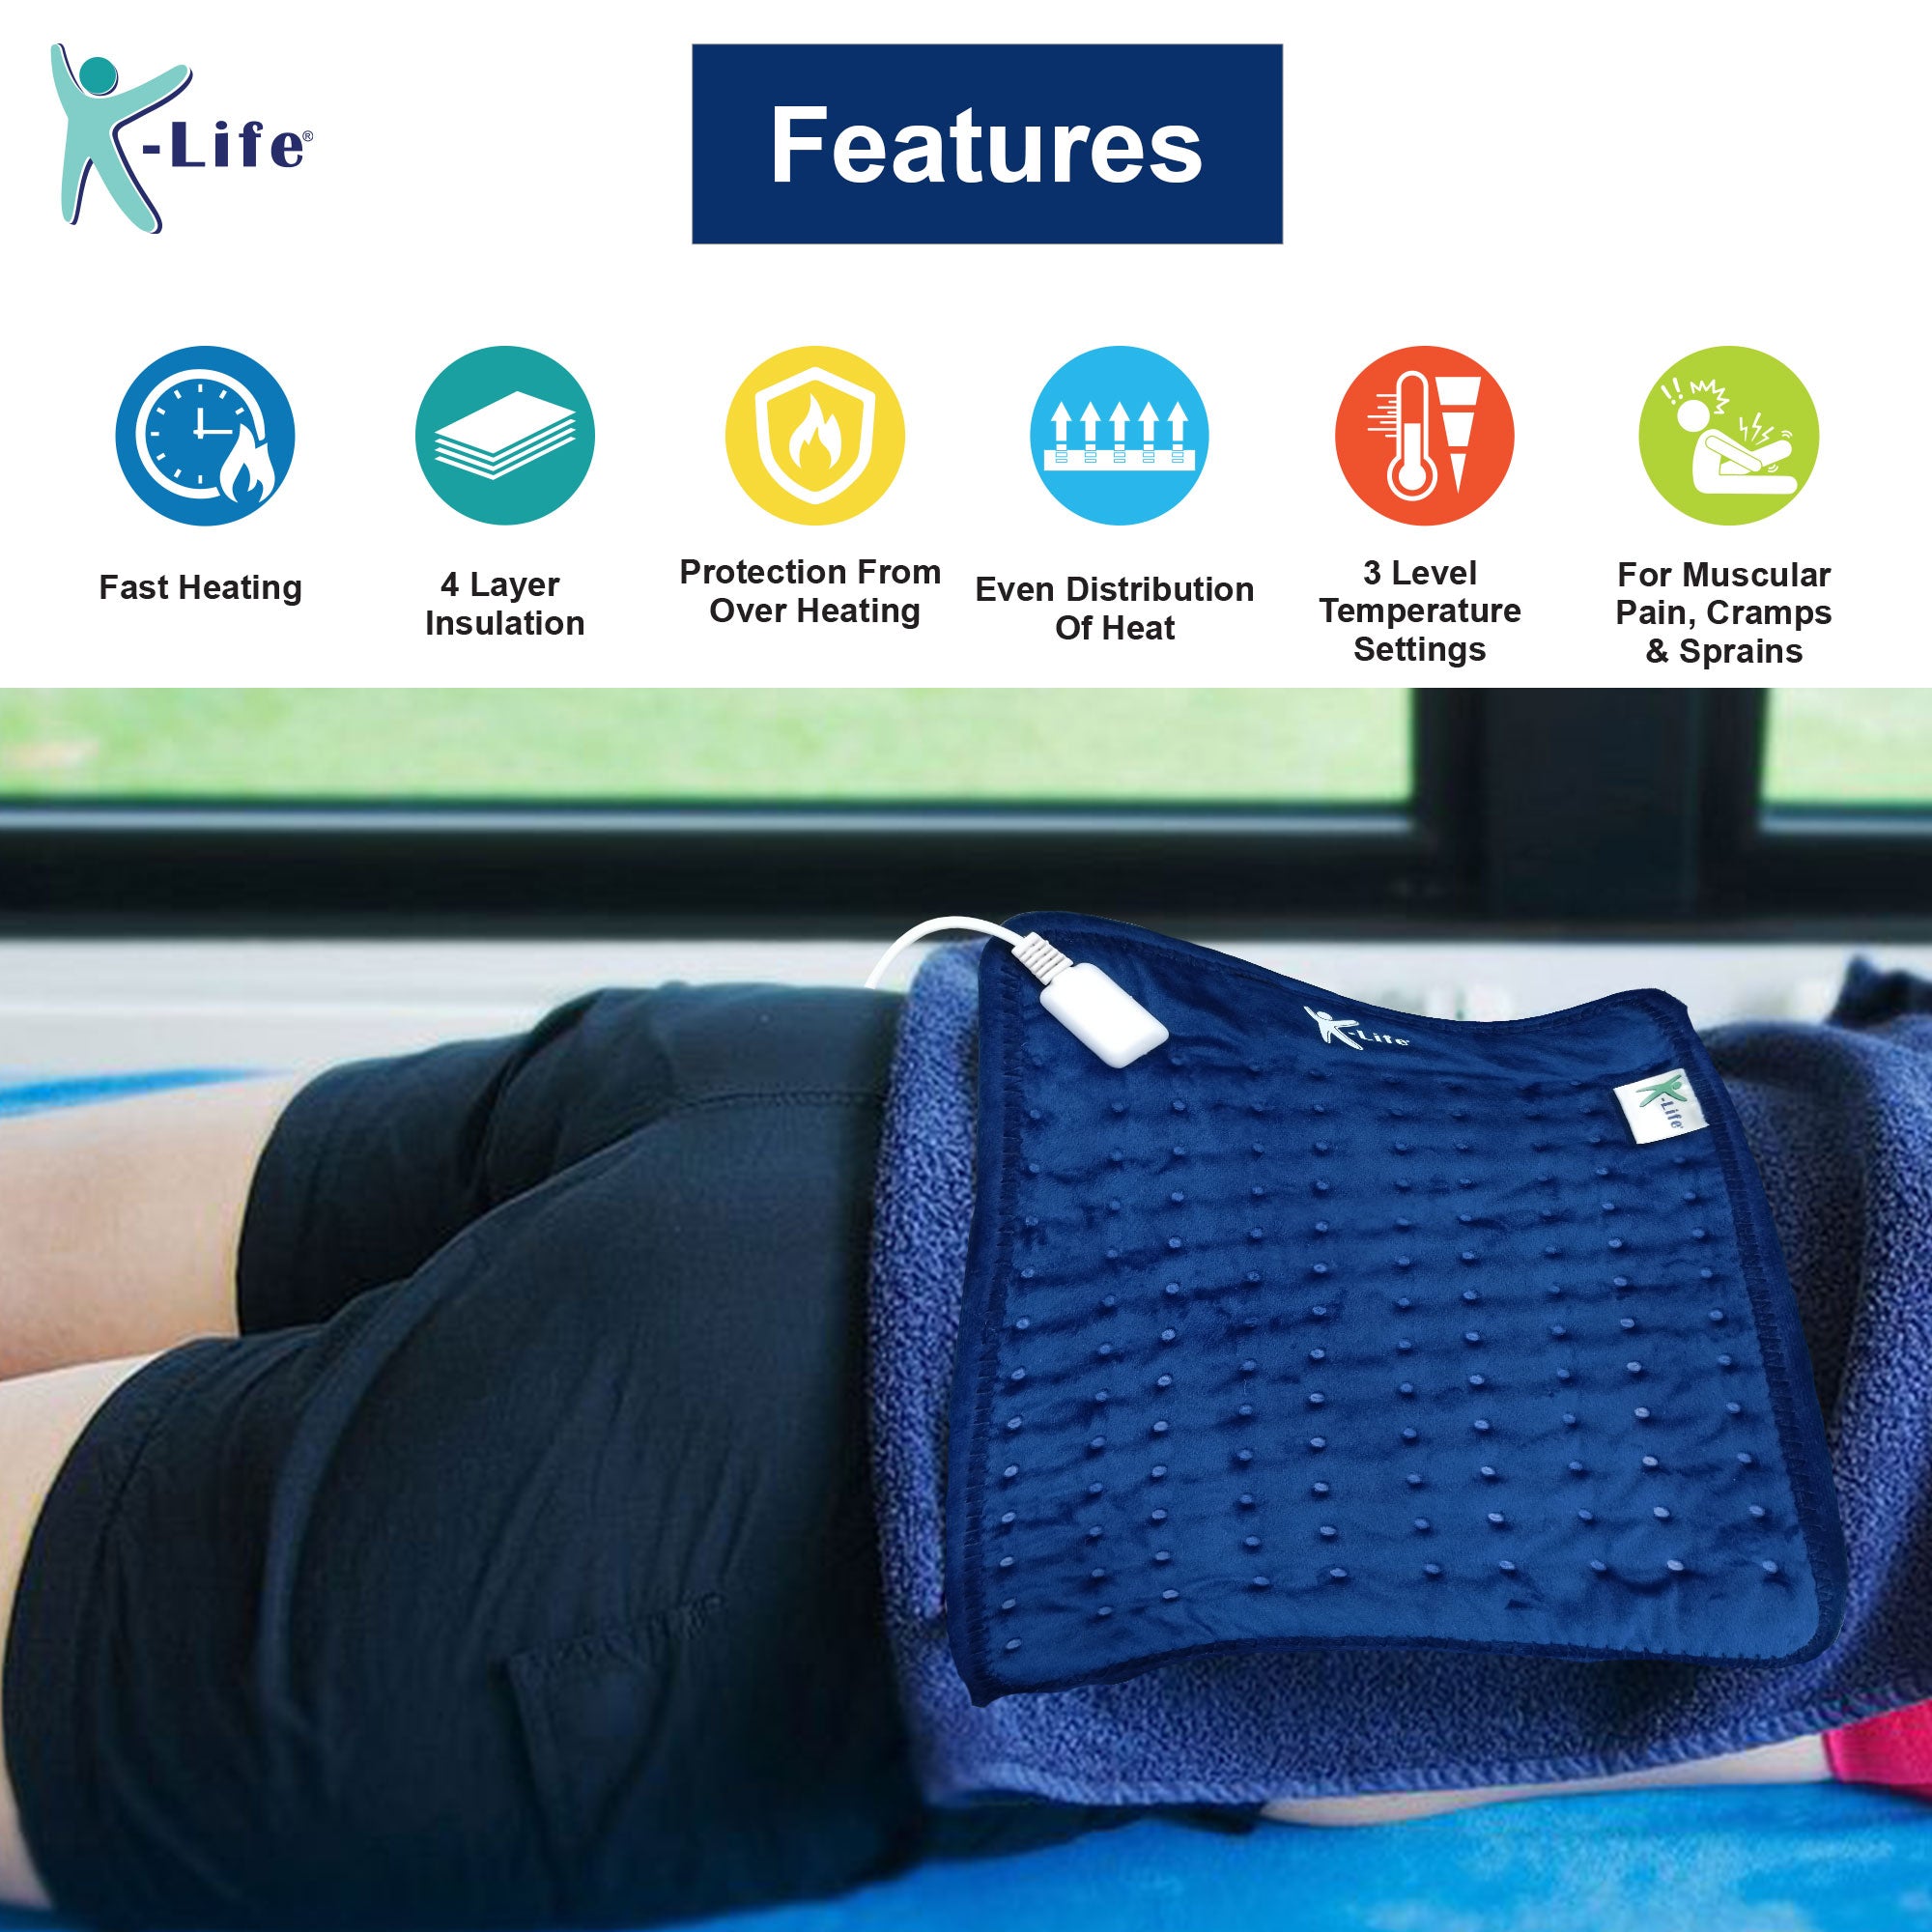 K-life Velvet Heat Therapy Orthopedic Pain Relief Electric Heating Pad with Temperature Controller for Joints, Muscle, Back, Leg, Shoulder, Knee, Neck & Period Cramps